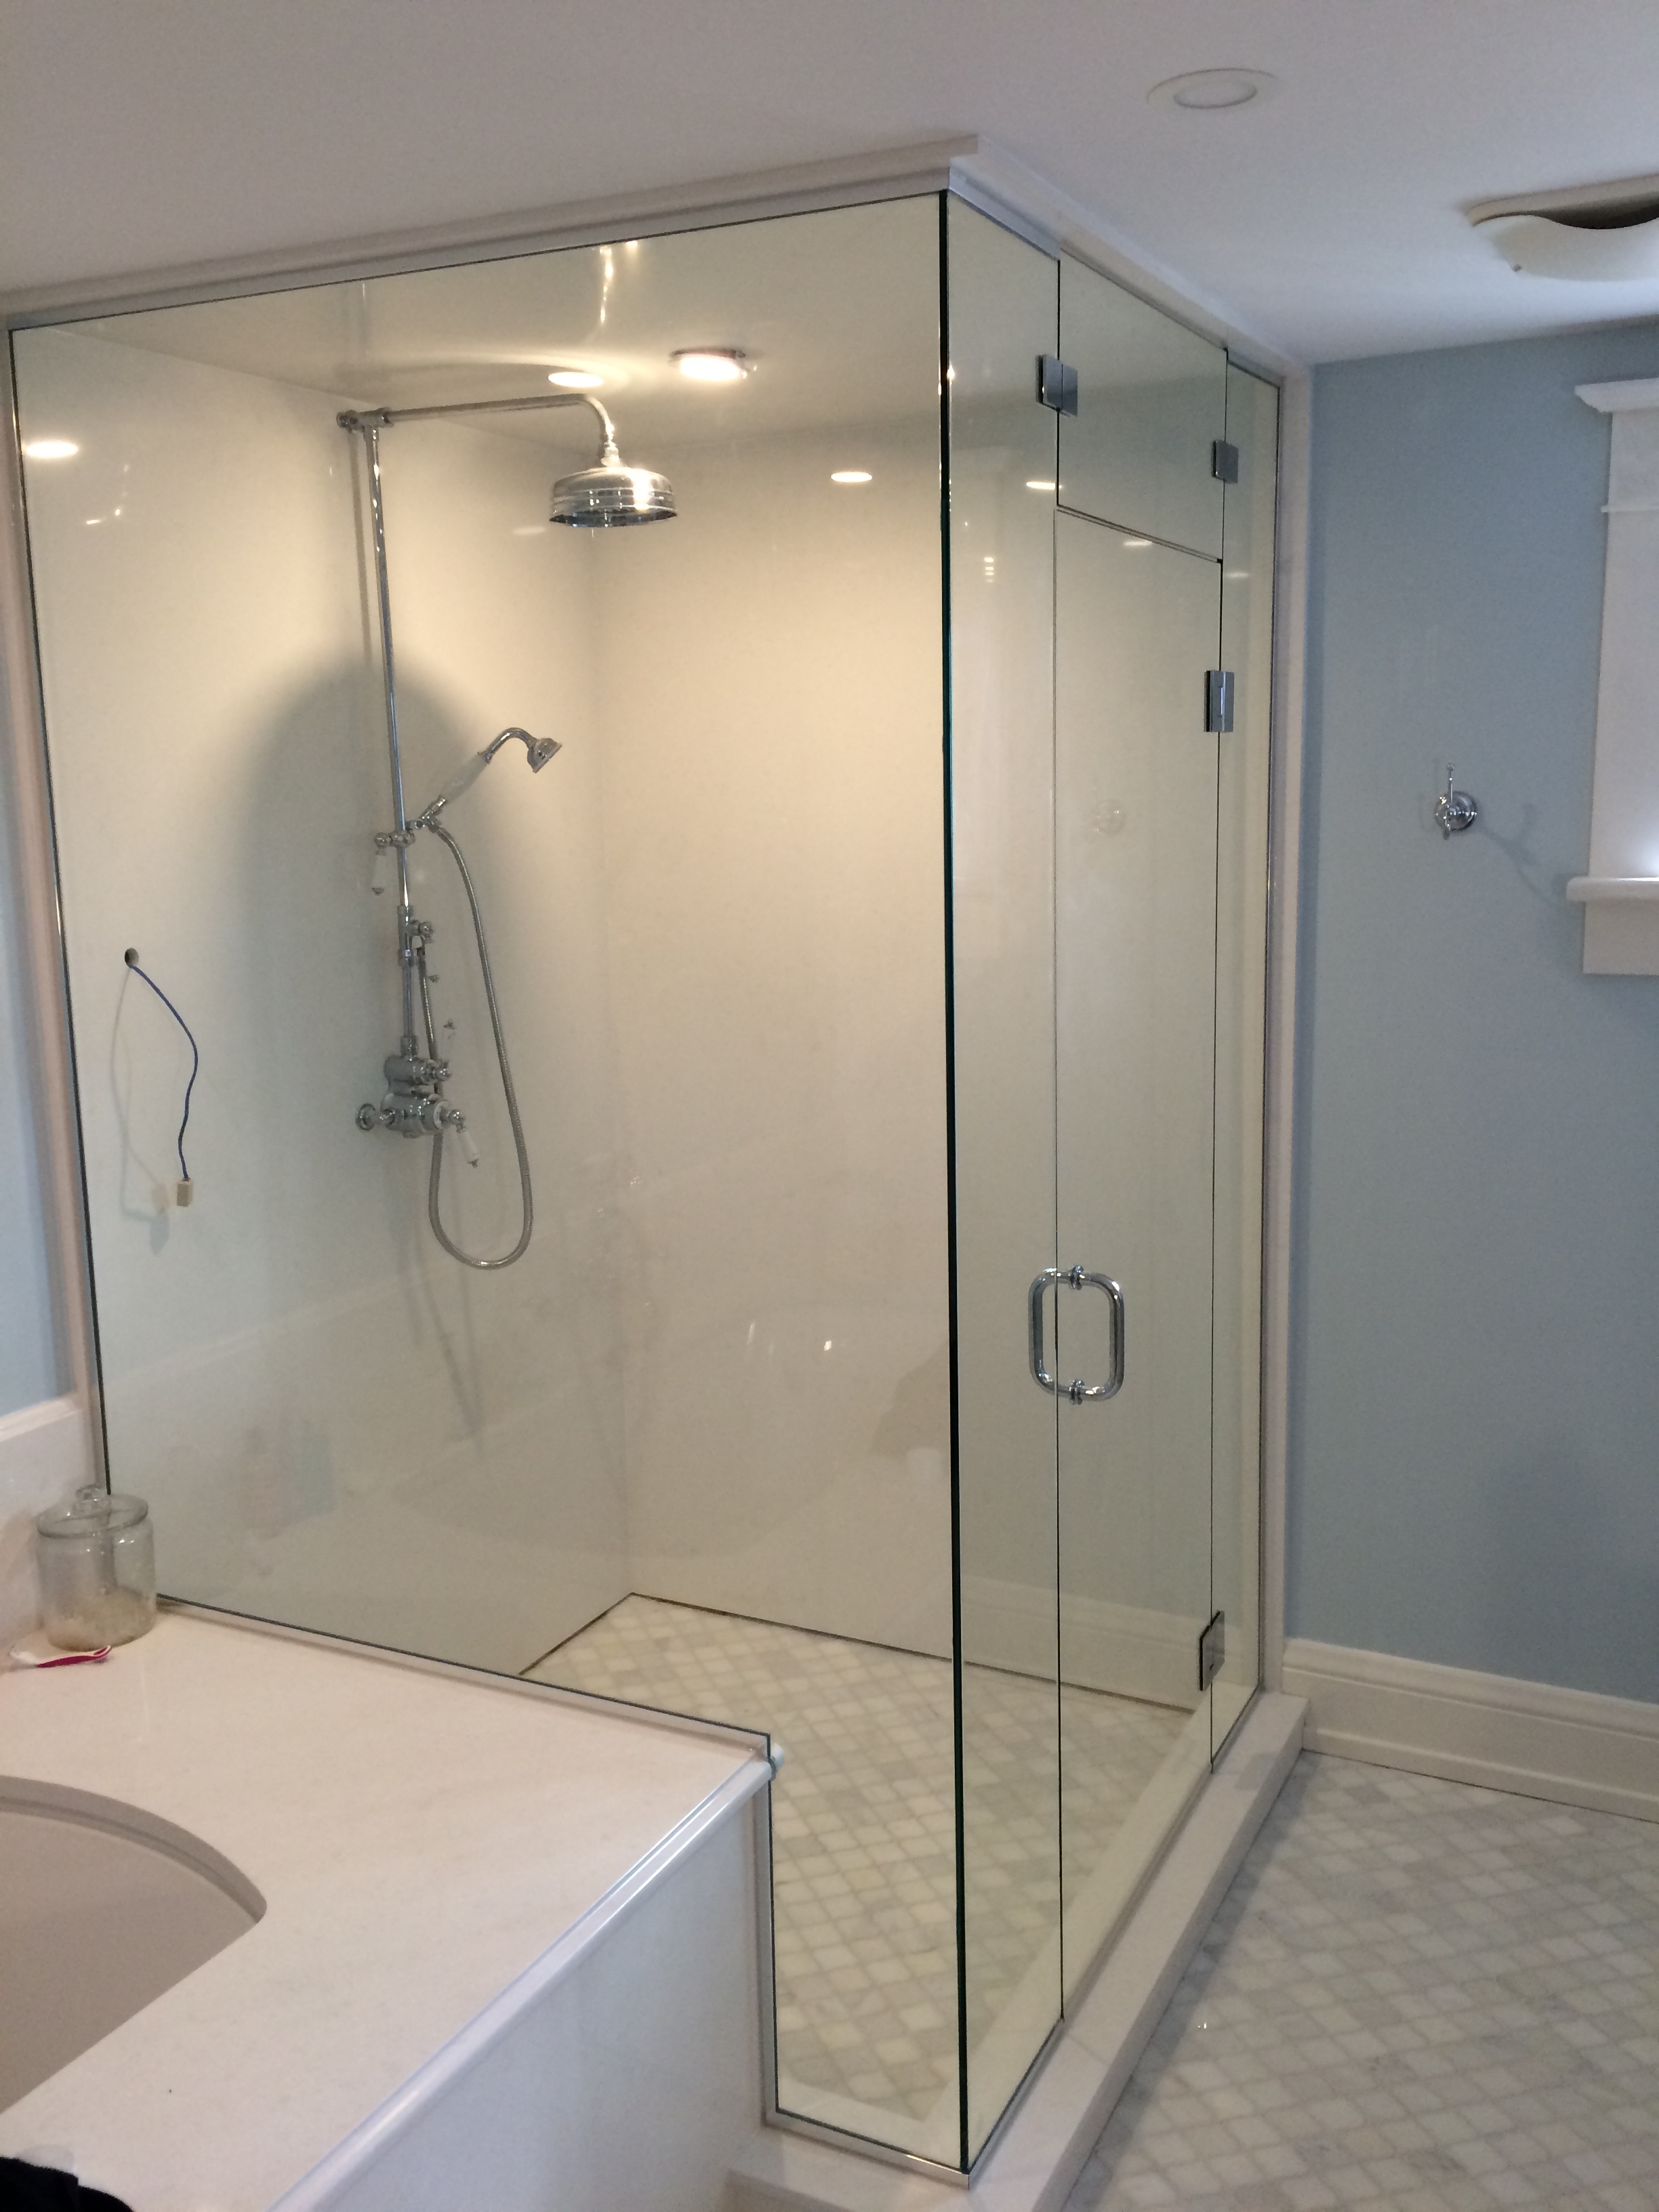    Michele, just to let you and your men know that there is not a day that I am not amazed with the wonderful job done. The glass enclosed shower is amazing, so thanks for a wonderful job. I KNOW we live in a busy world but we need to show our apprec